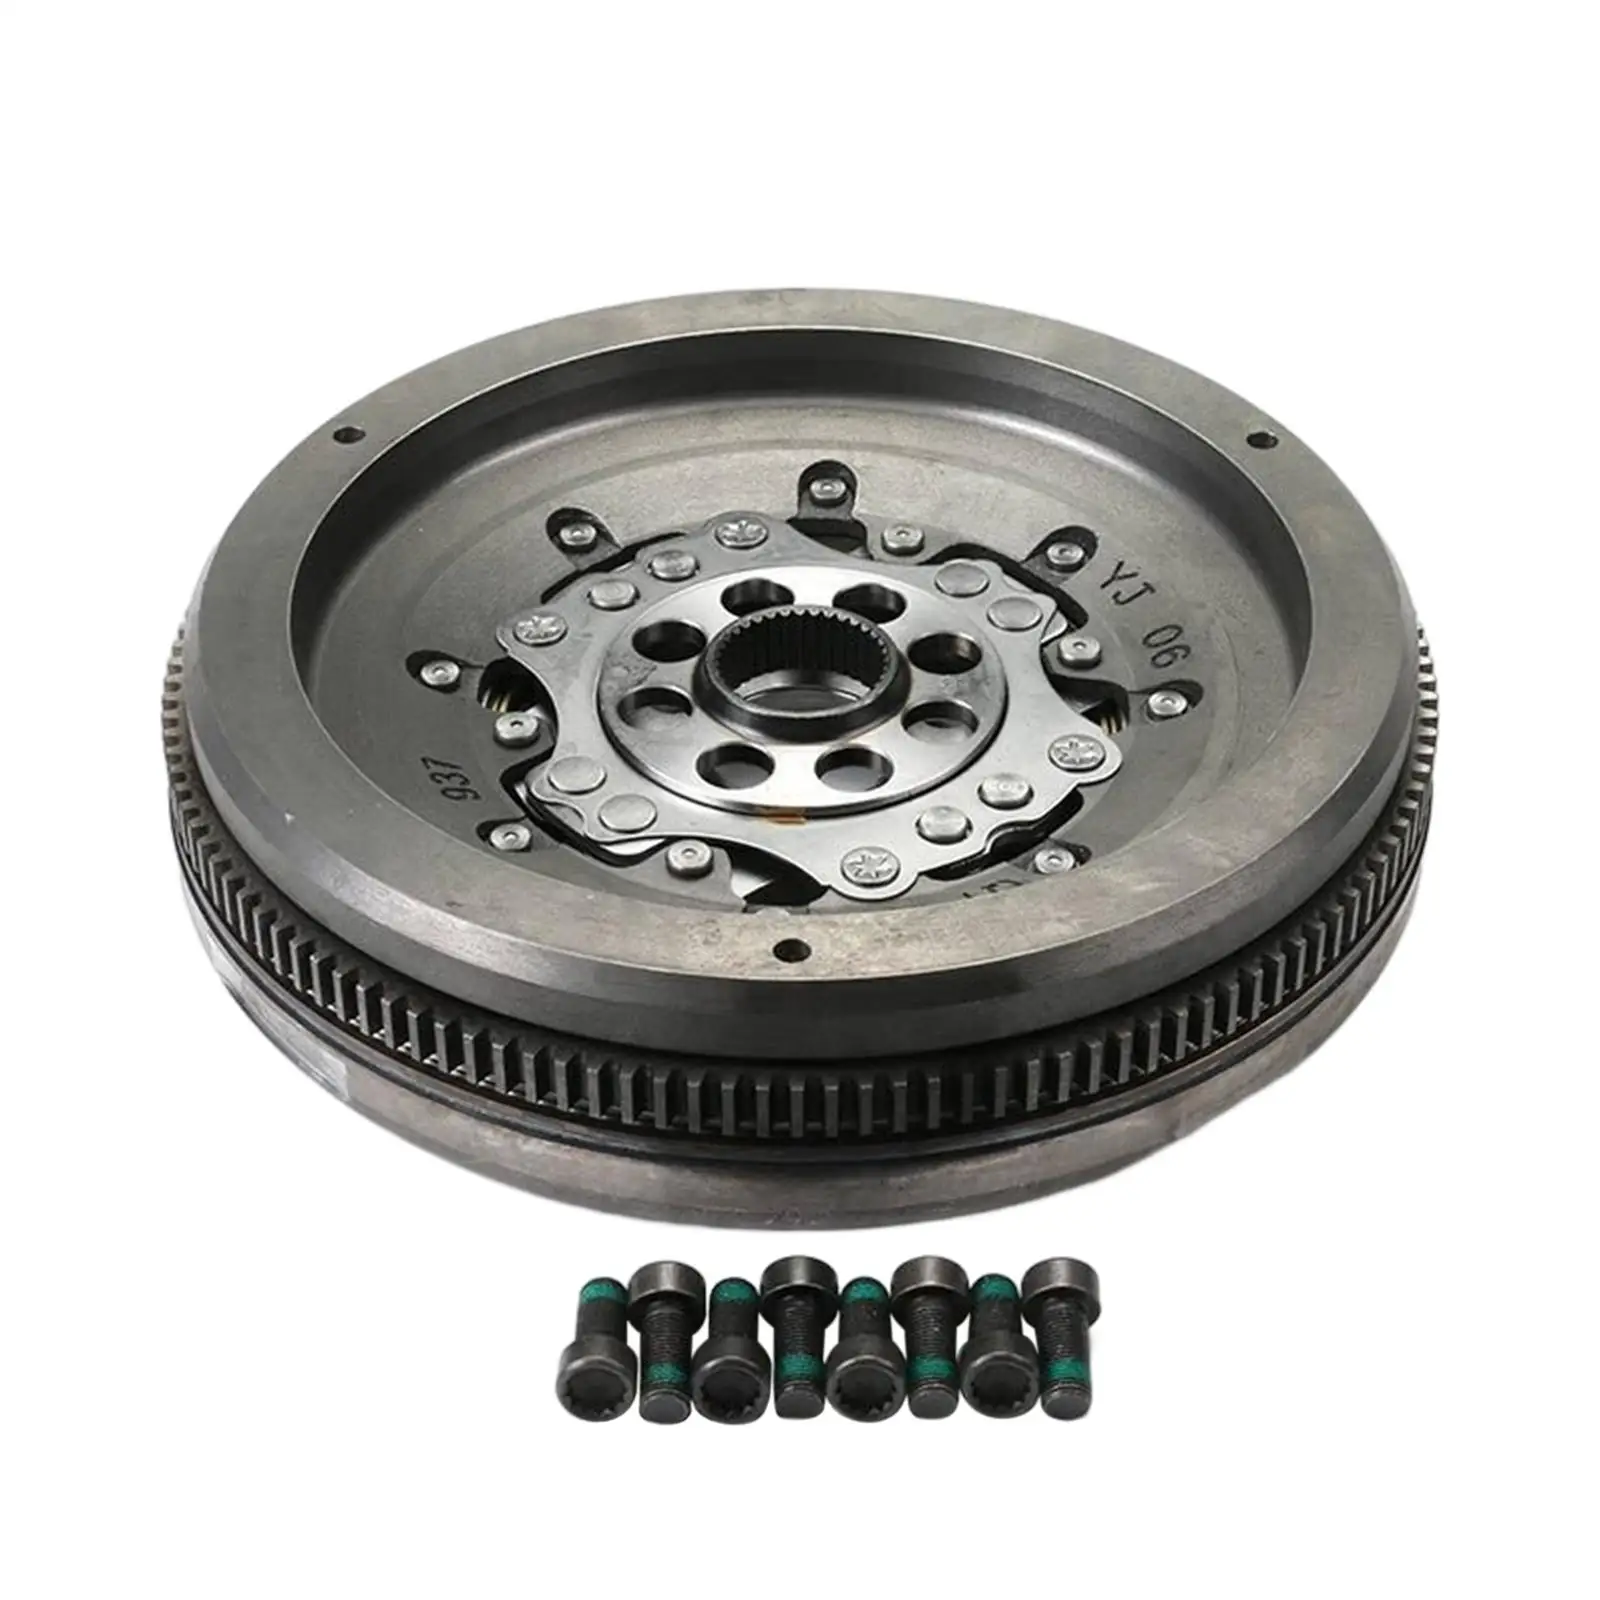 Transmission Flywheel 02E Dq250 132 Teeth 8 Holes for VW Accessories Durable